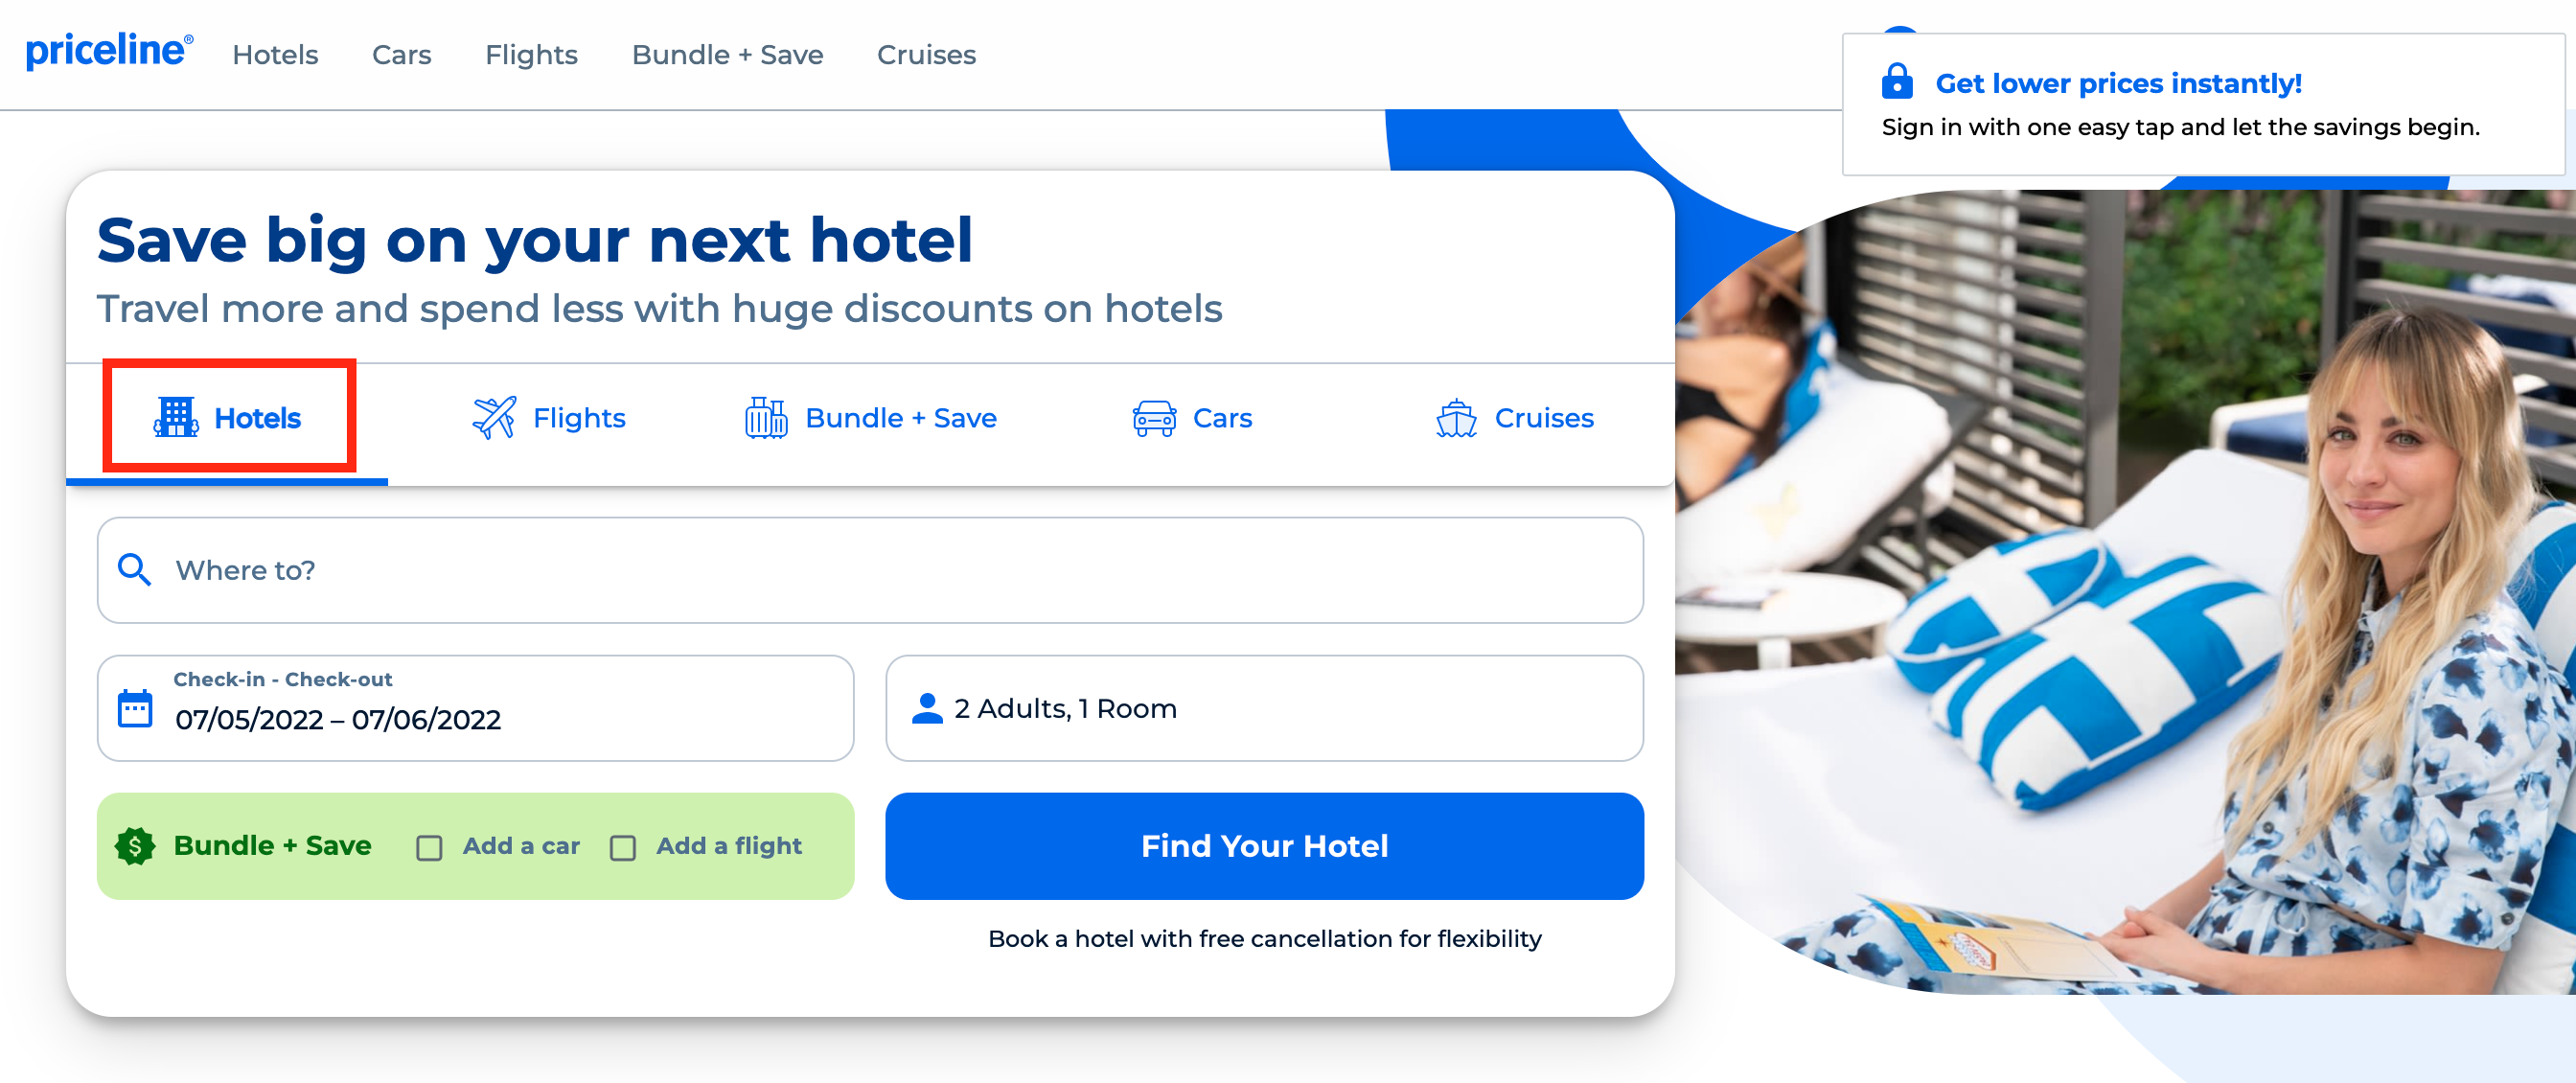 A Complete Guide To Booking Travel With Priceline [2022]